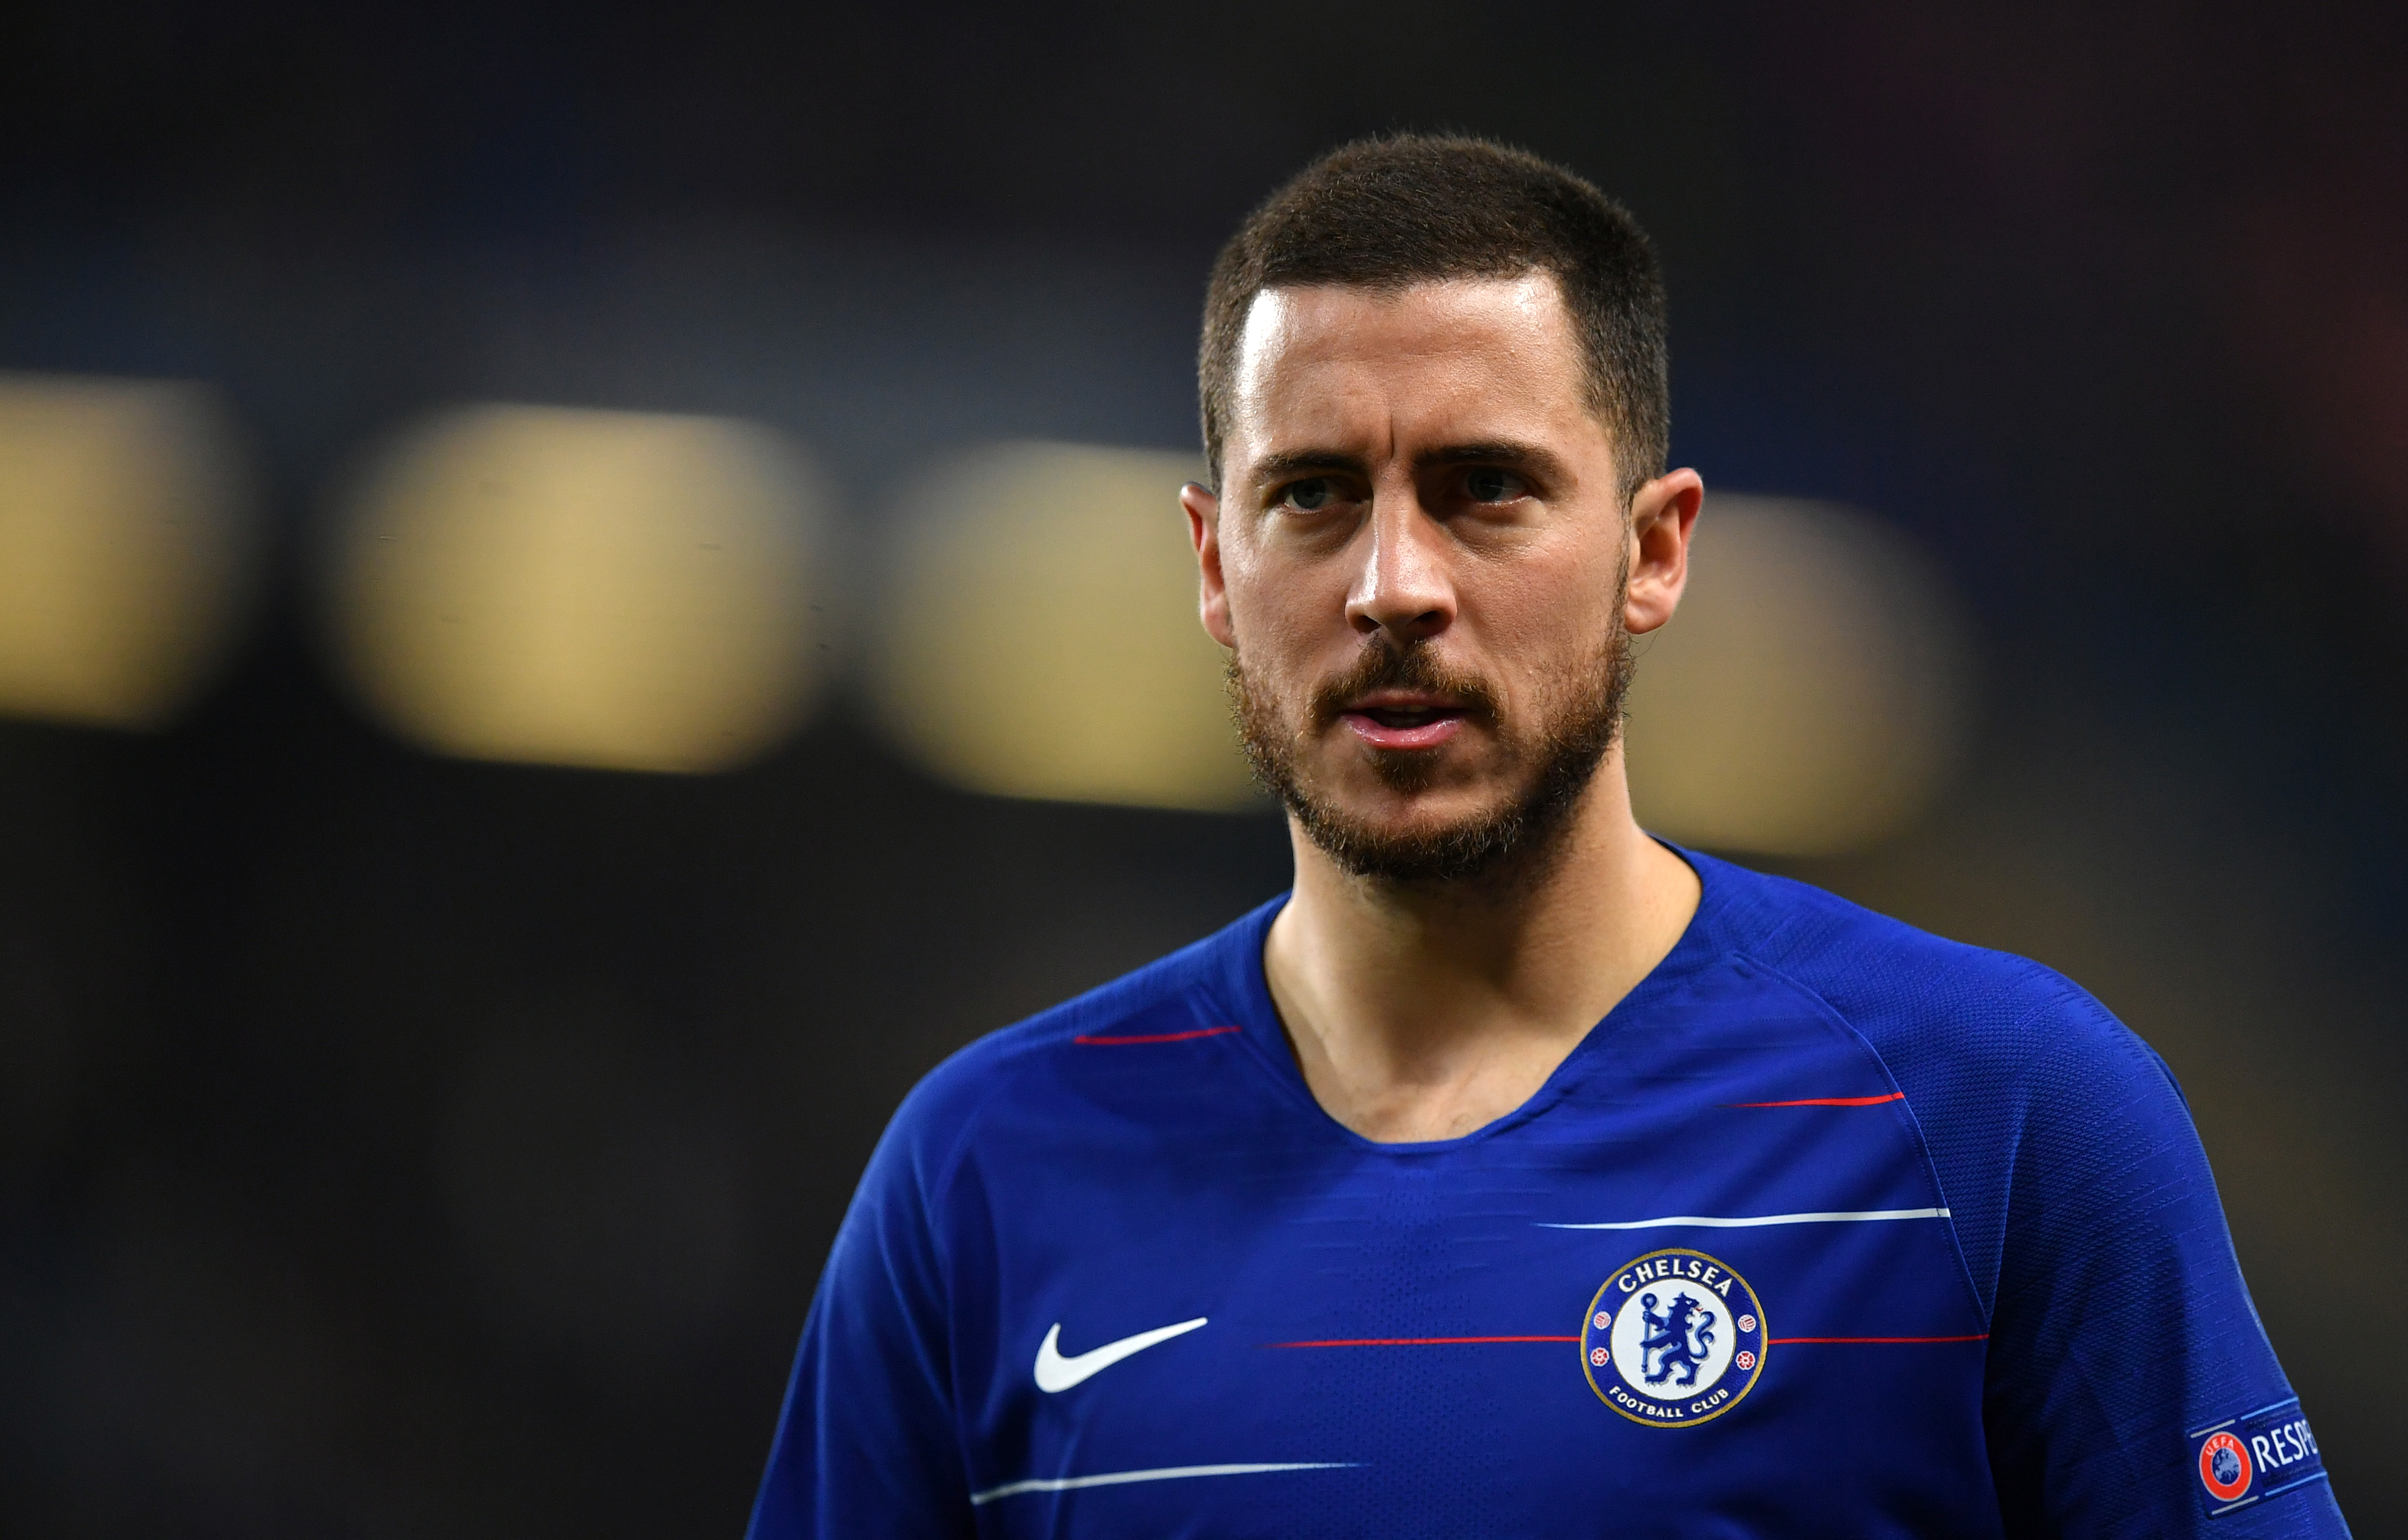 LONDON, ENGLAND - APRIL 18:  Eden Hazard of Chelsea looks on during the UEFA Europa League Quarter Final Second Leg match between Chelsea and Slavia Praha at Stamford Bridge on April 18, 2019 in London, England. (Photo by Dan Mullan/Getty Images)